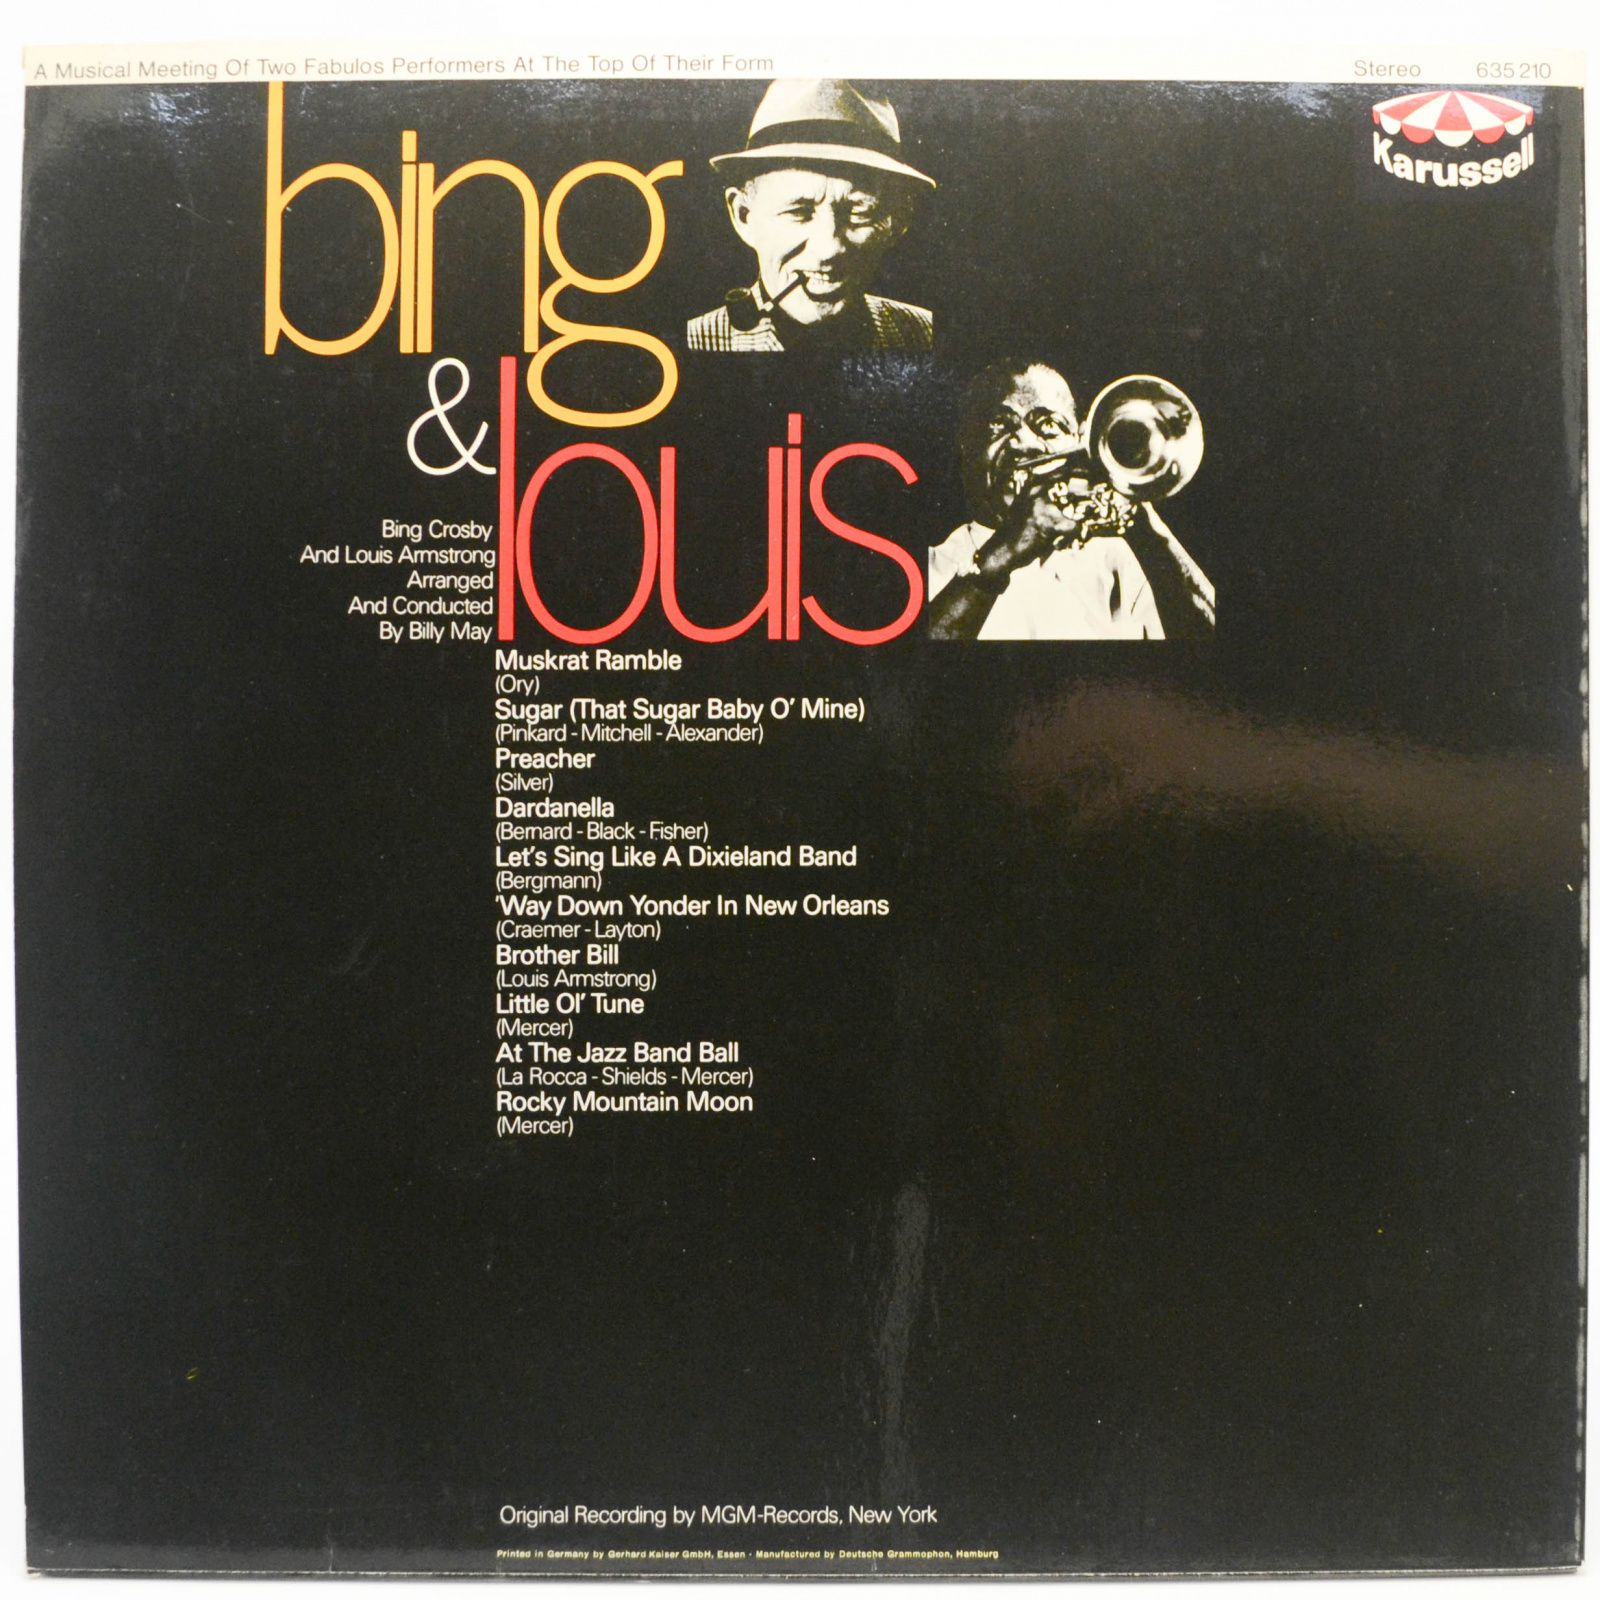 Bing Crosby And Louis Armstrong, Billy May — Bing & Louis, 1960